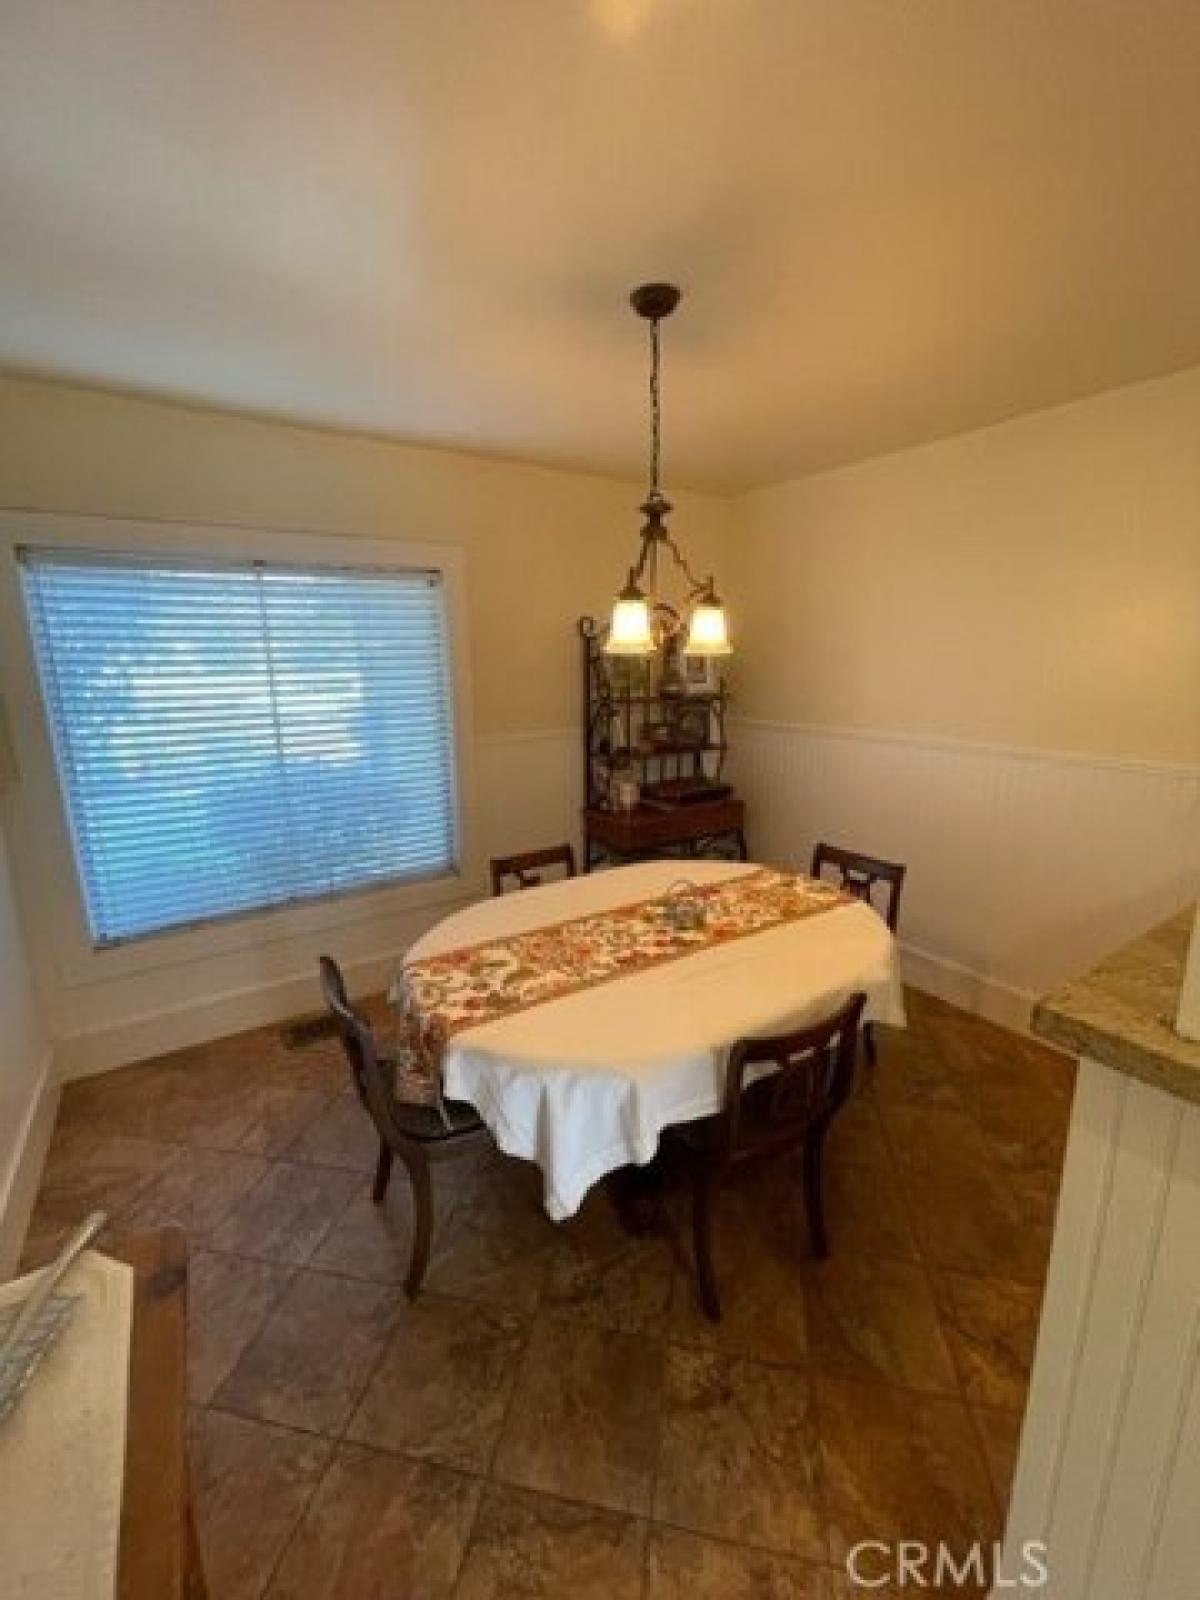 Picture of Home For Rent in Yorba Linda, California, United States